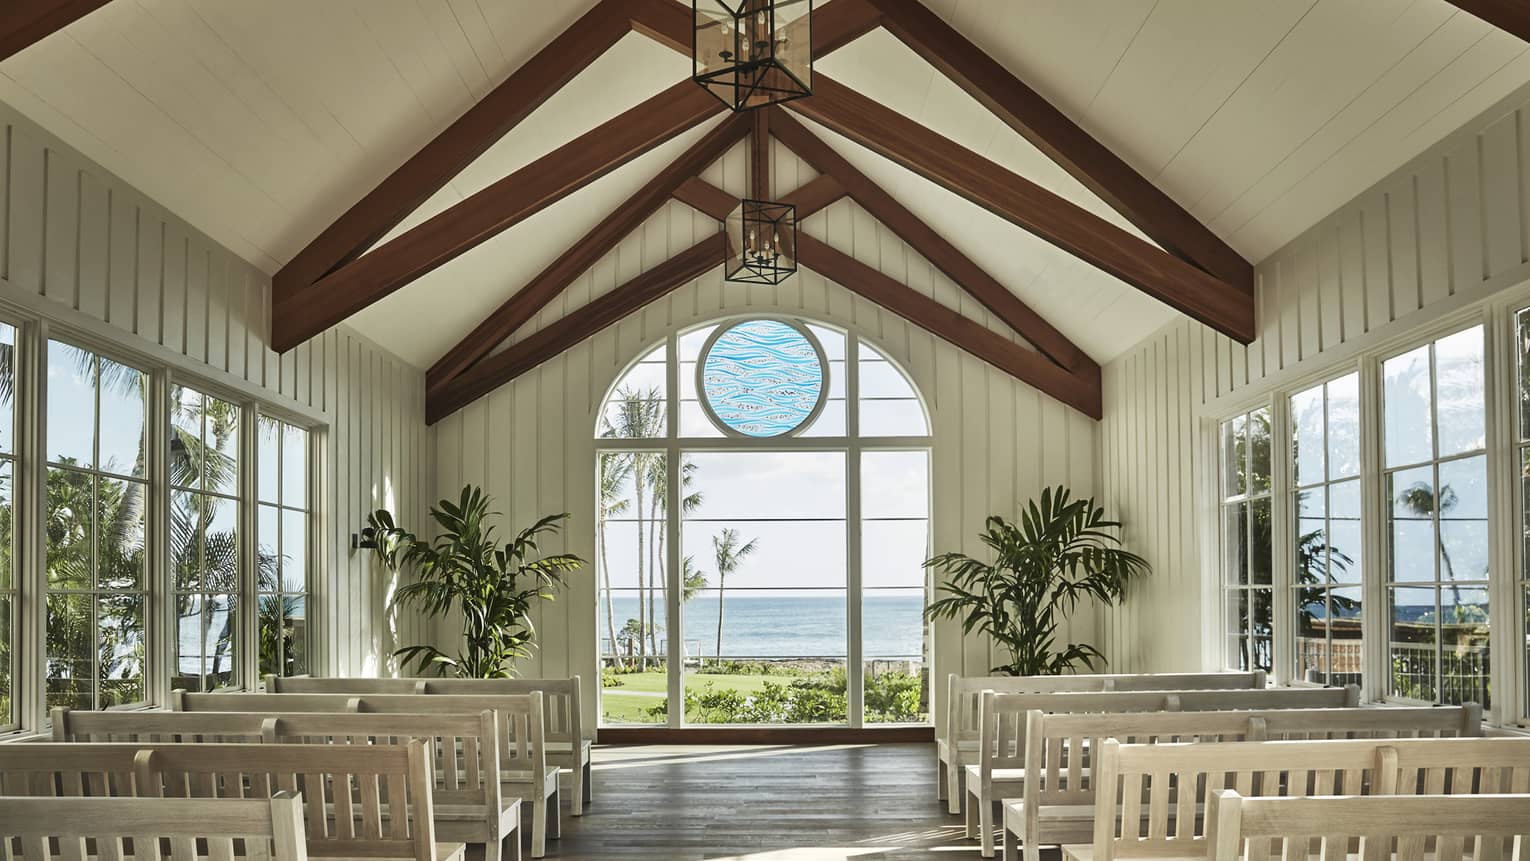 White pews line bright wedding chapel, ocean view through arched window